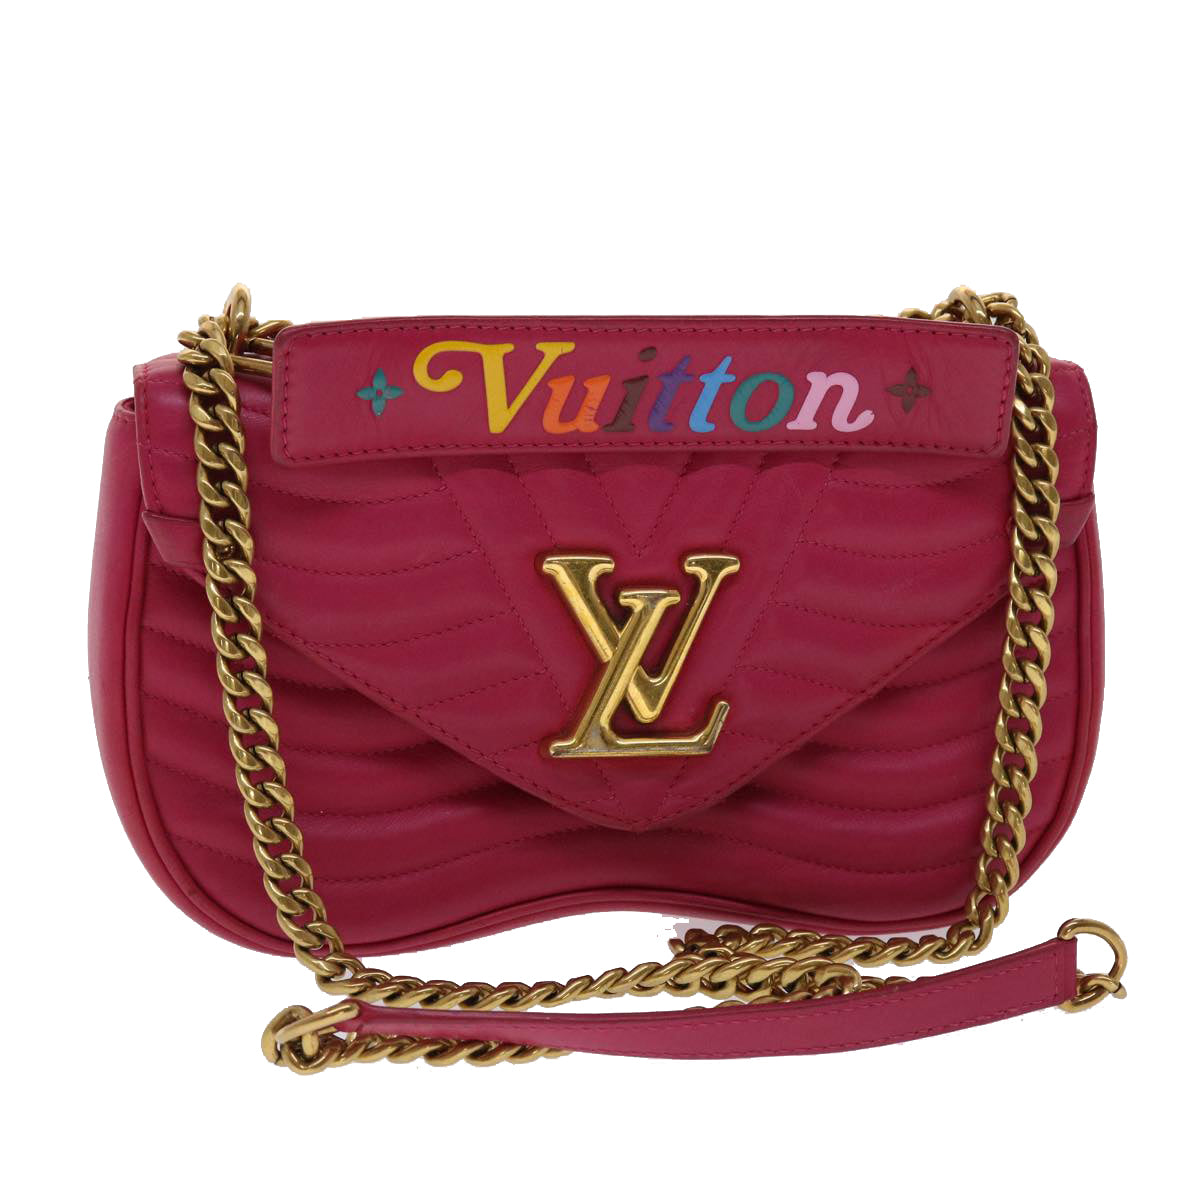 LOUIS VUITTON New Wave MM Chain Shoulder Bag Leather 2Way Pink M55020 Auth 24027